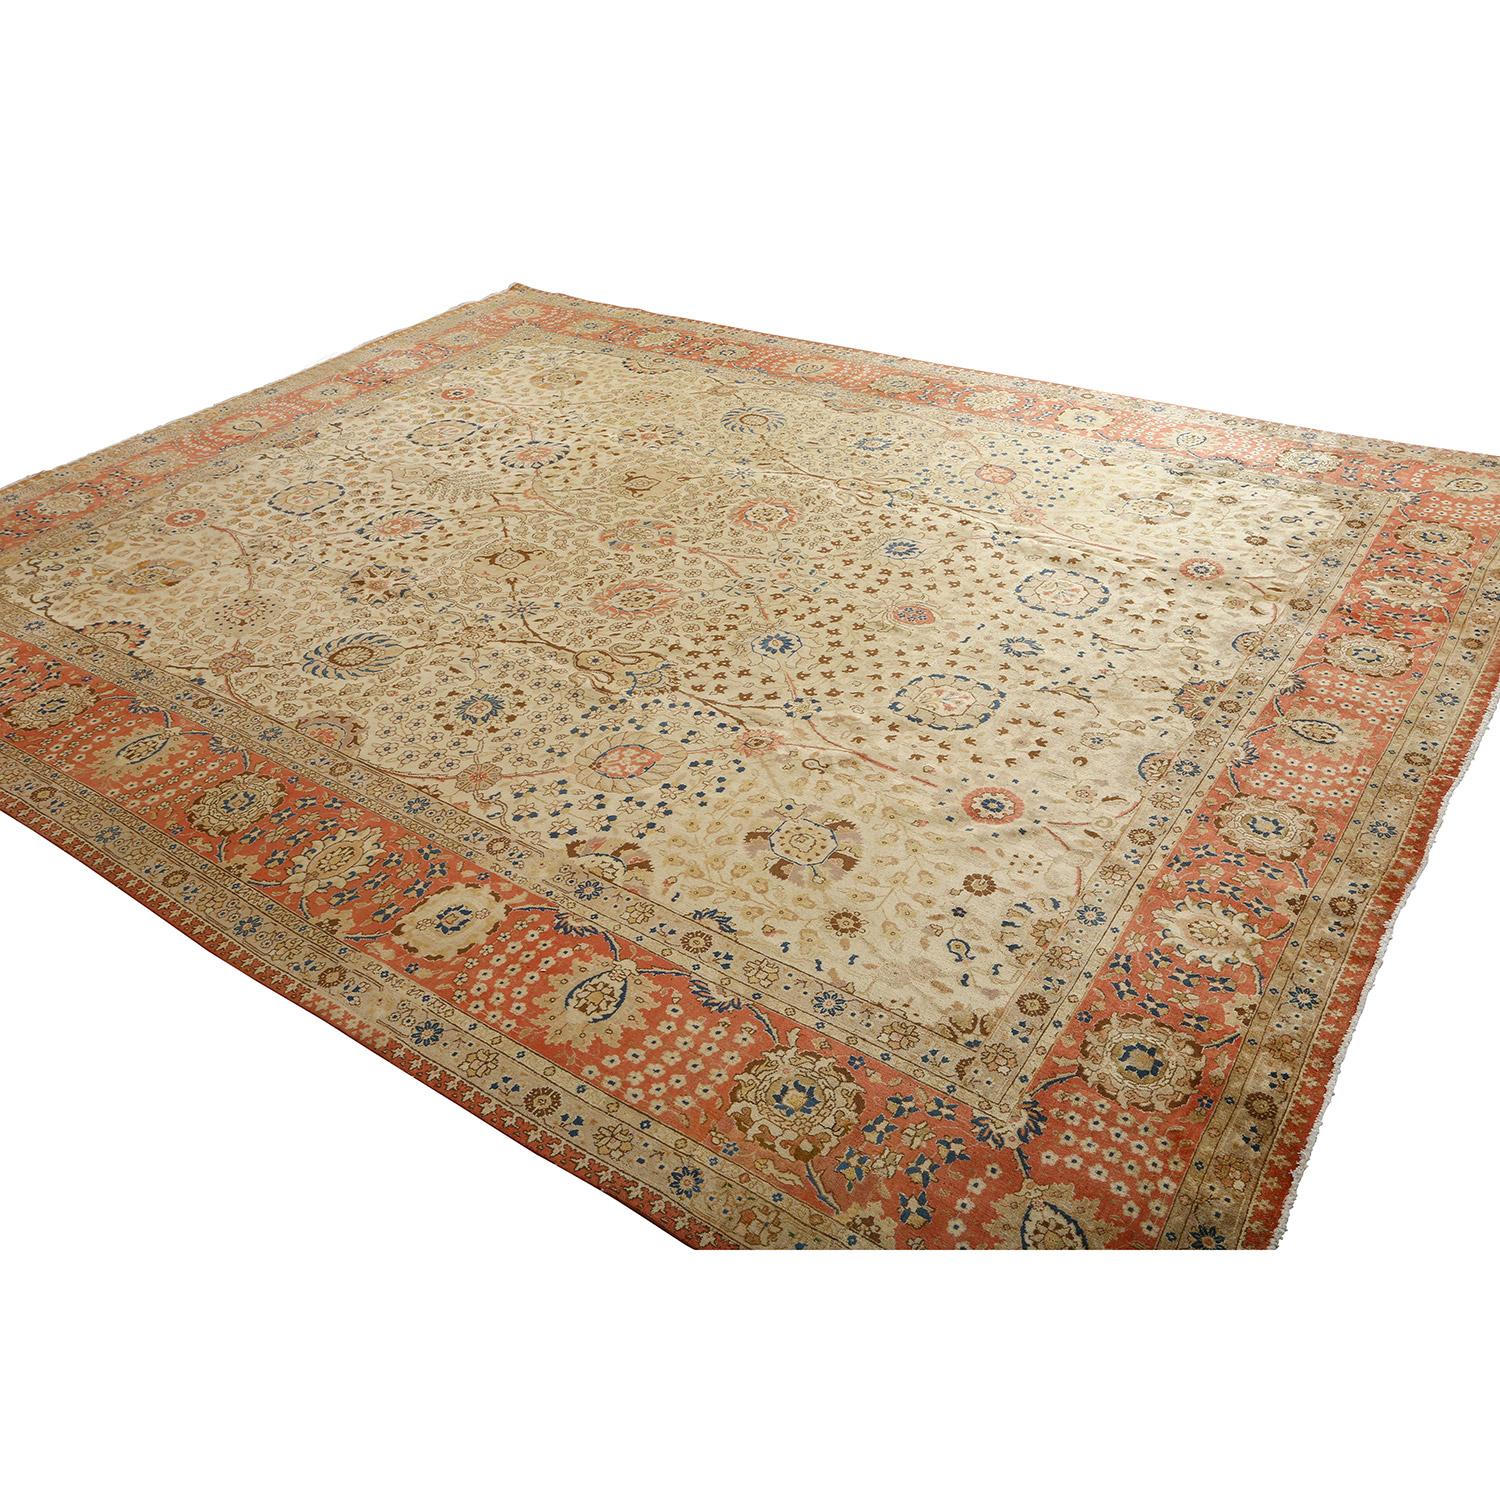 This vintage Tabriz rug, expertly woven by Narvani, showcases the hallmarks of Persian craftsmanship with an exquisite all-over design. The entire surface of the rug is adorned with an intricate, balanced pattern that reflects the timeless artistry